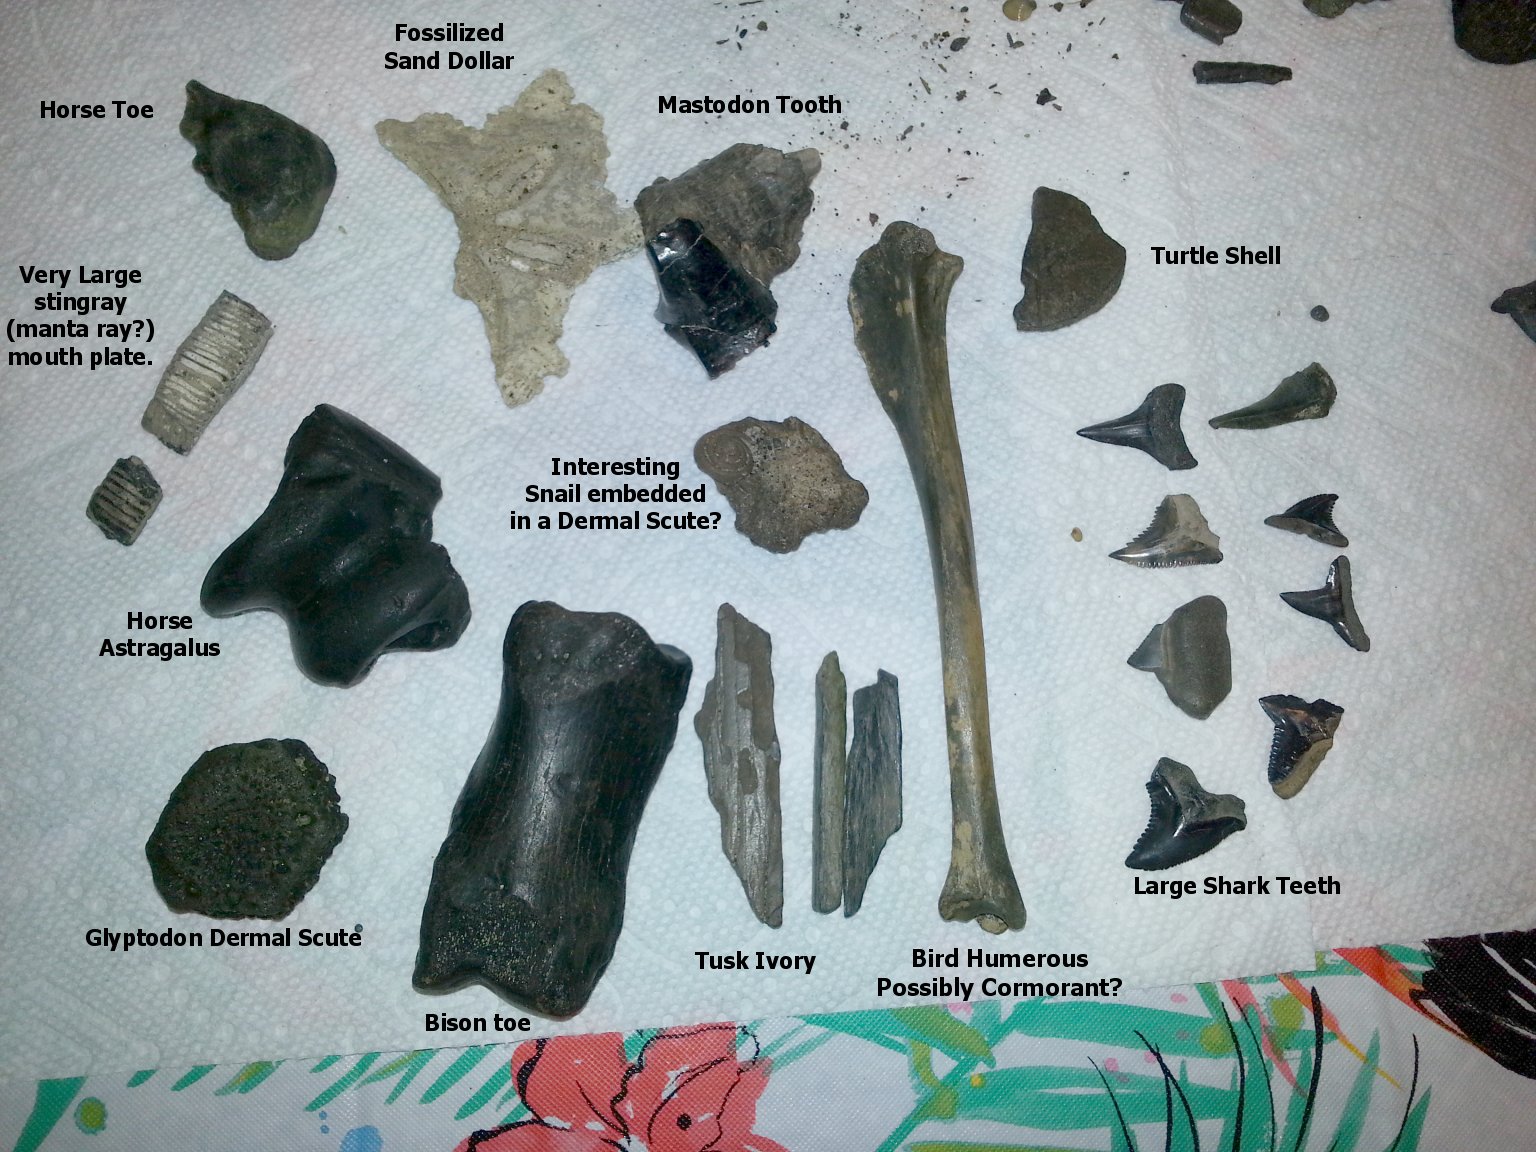 Our best finds from fossil hunting the Peace River.